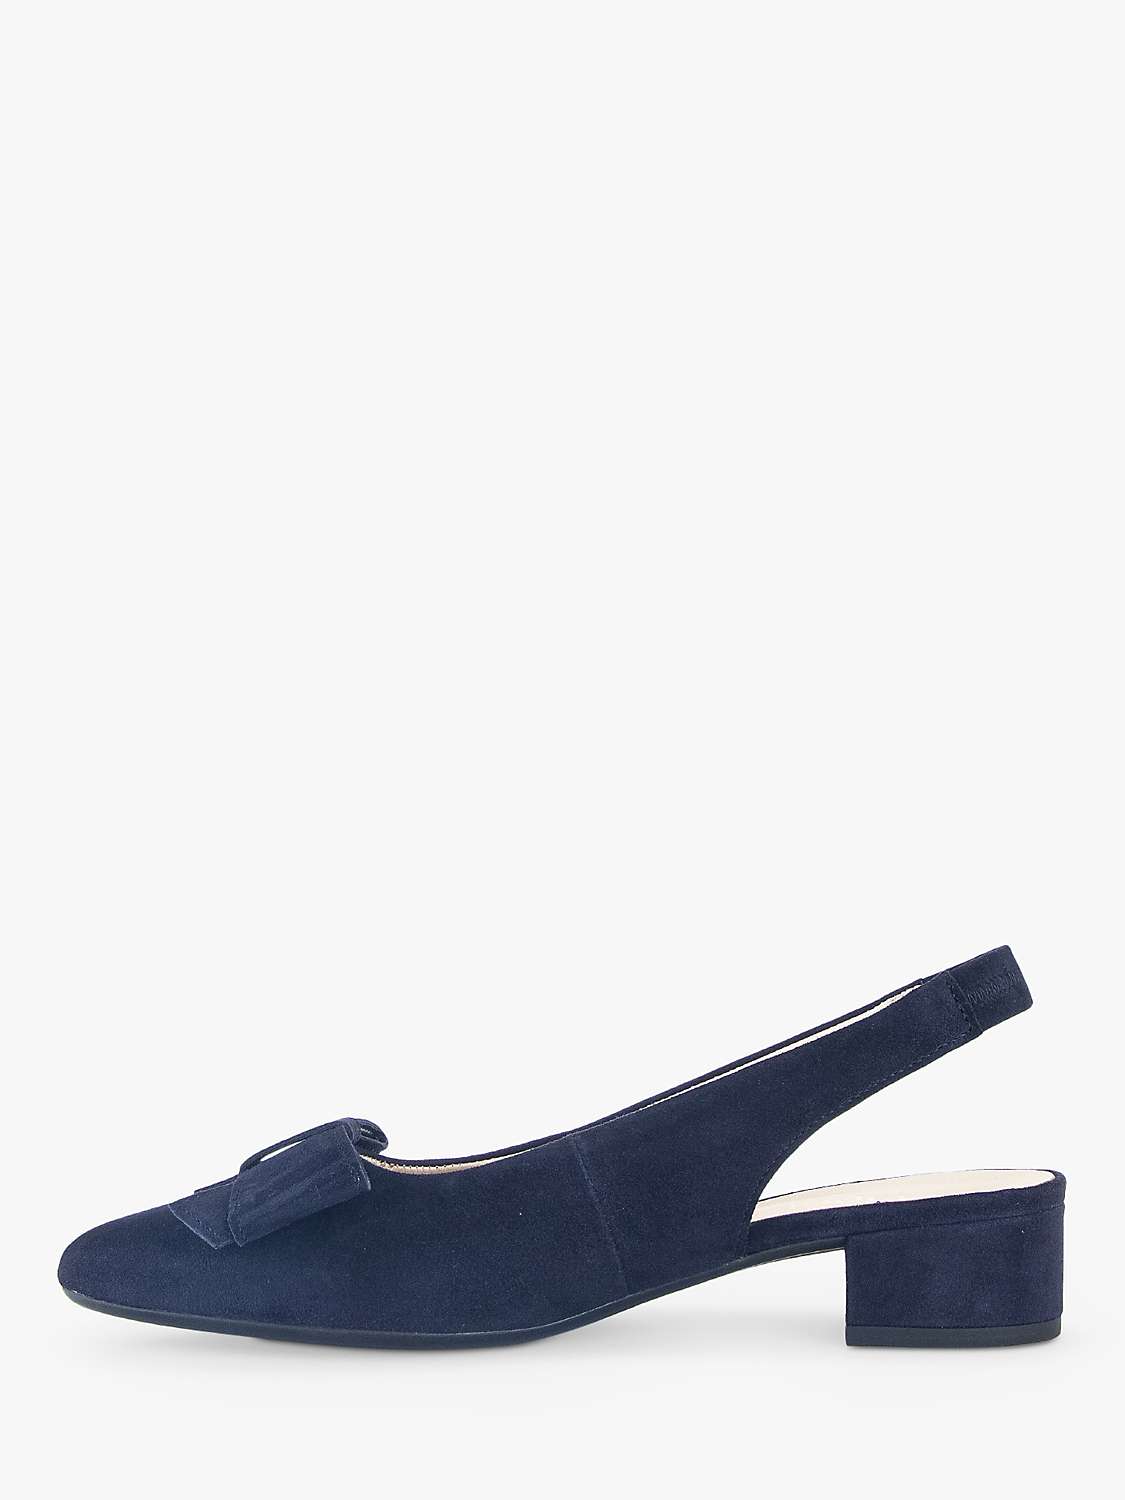 Buy Gabor Monte Carlo Suede Large Bow Detail Slingback Shoes Online at johnlewis.com